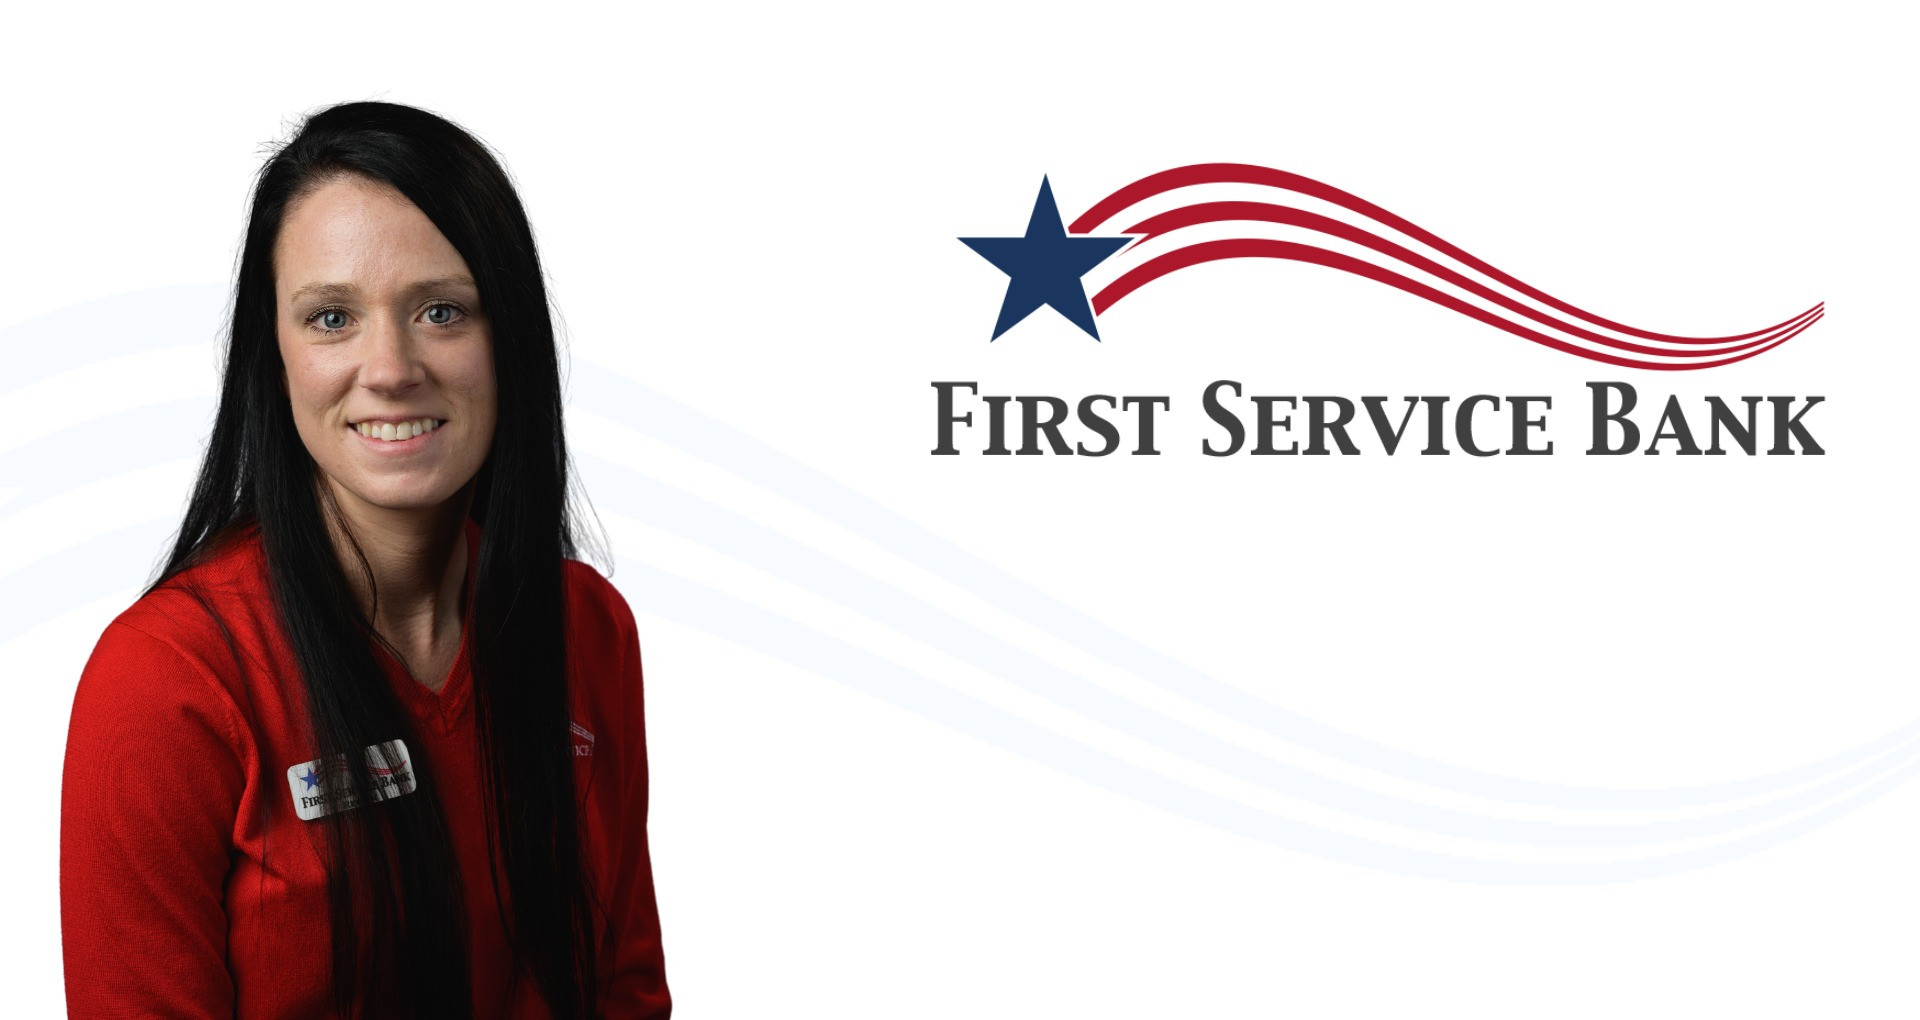 First Service Bank Announces Promotion of Regan Holland to Administration Support Manager